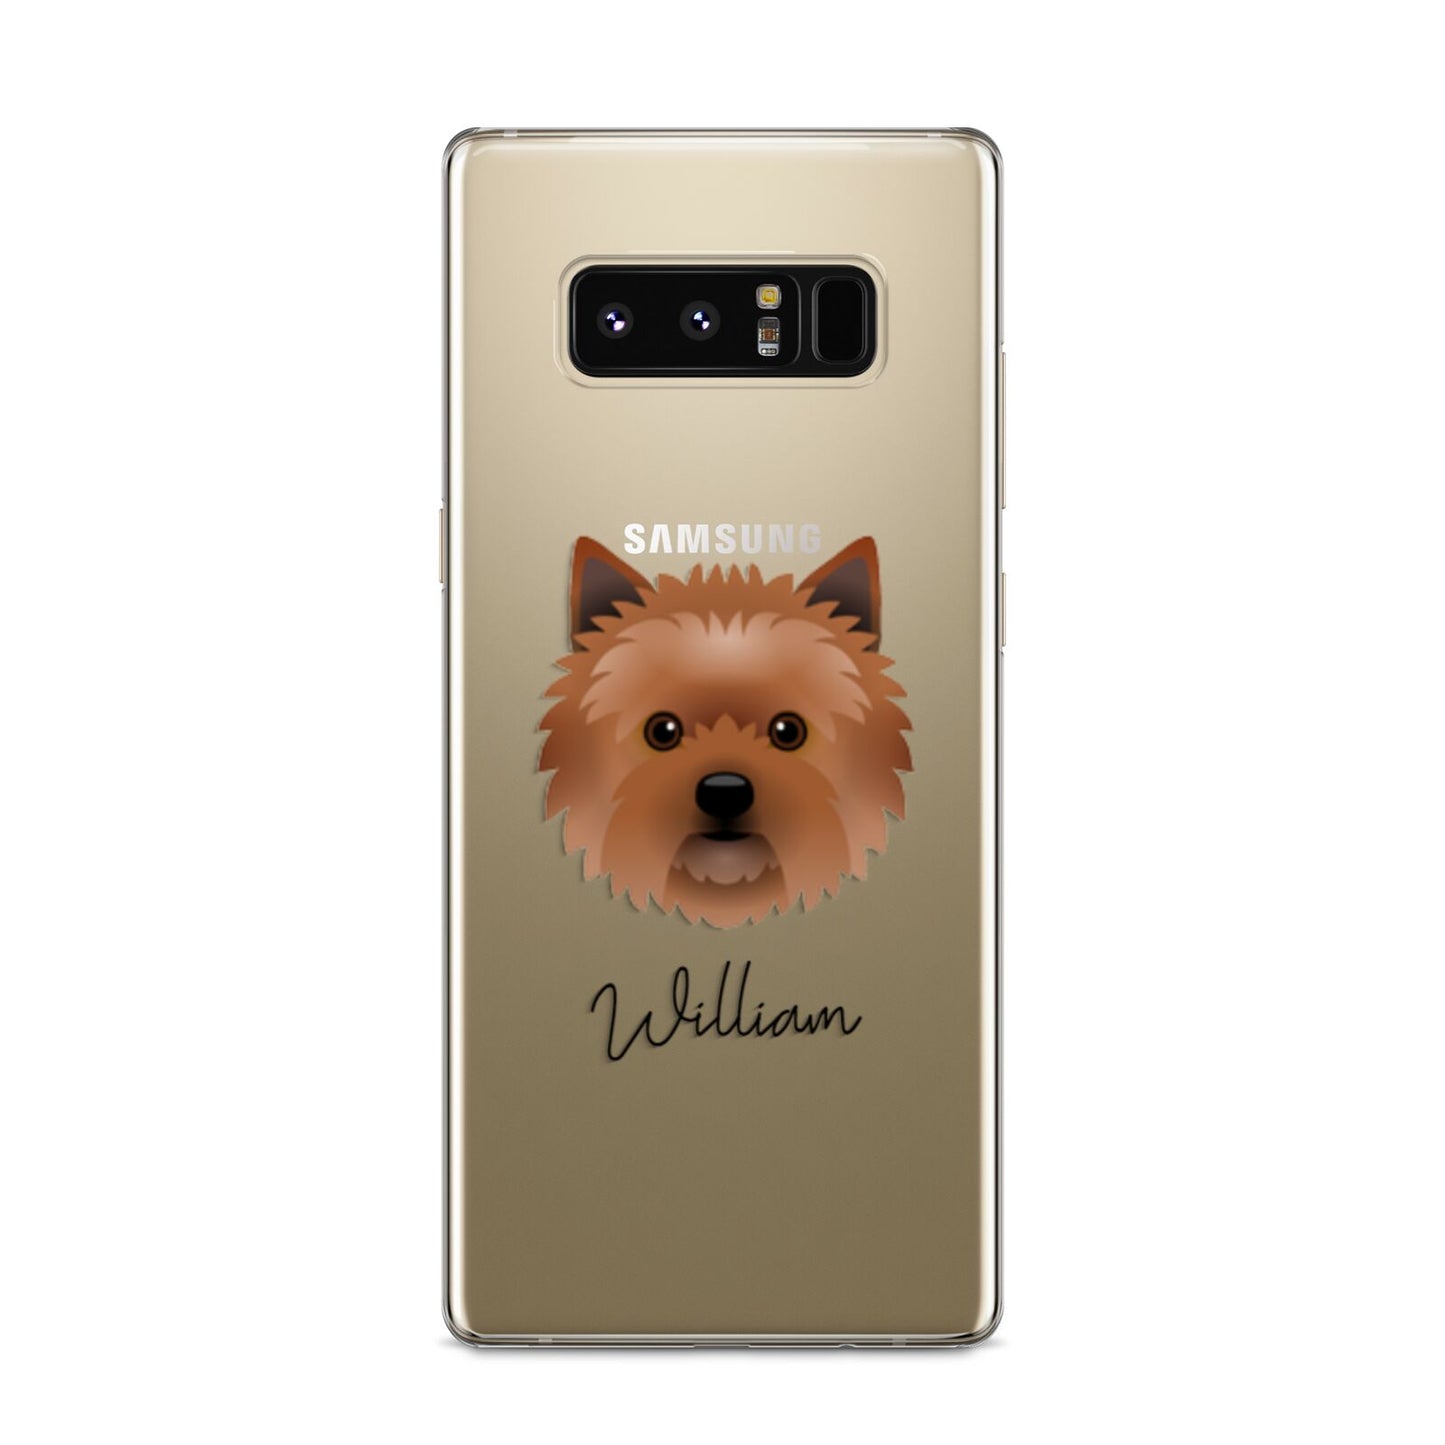 Cairn Terrier Personalised Samsung Galaxy S8 Case